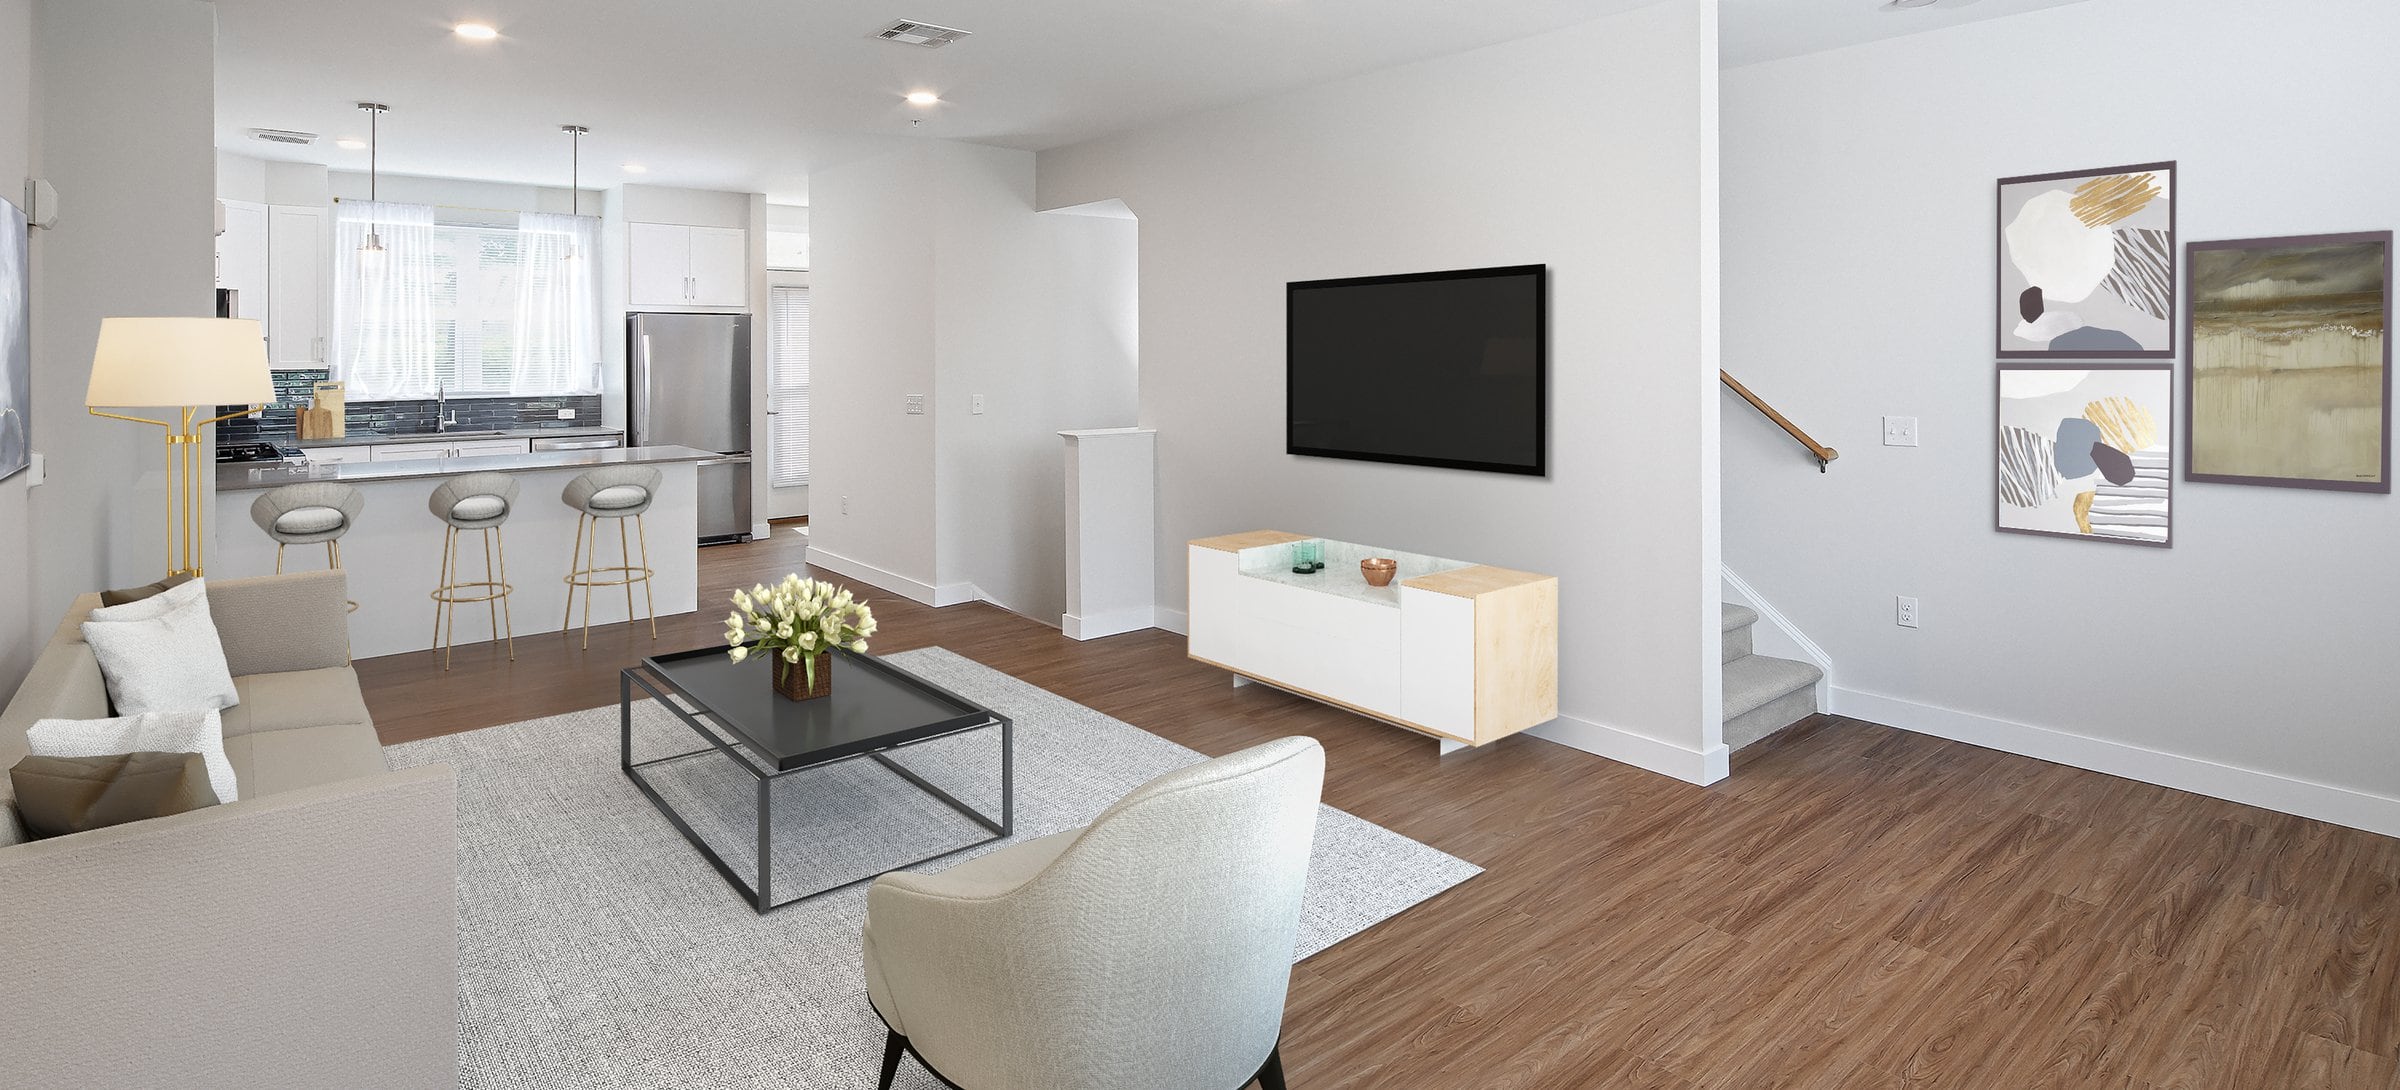 Phase II Renovated Package I townhome living and dining areas with hard surface flooring